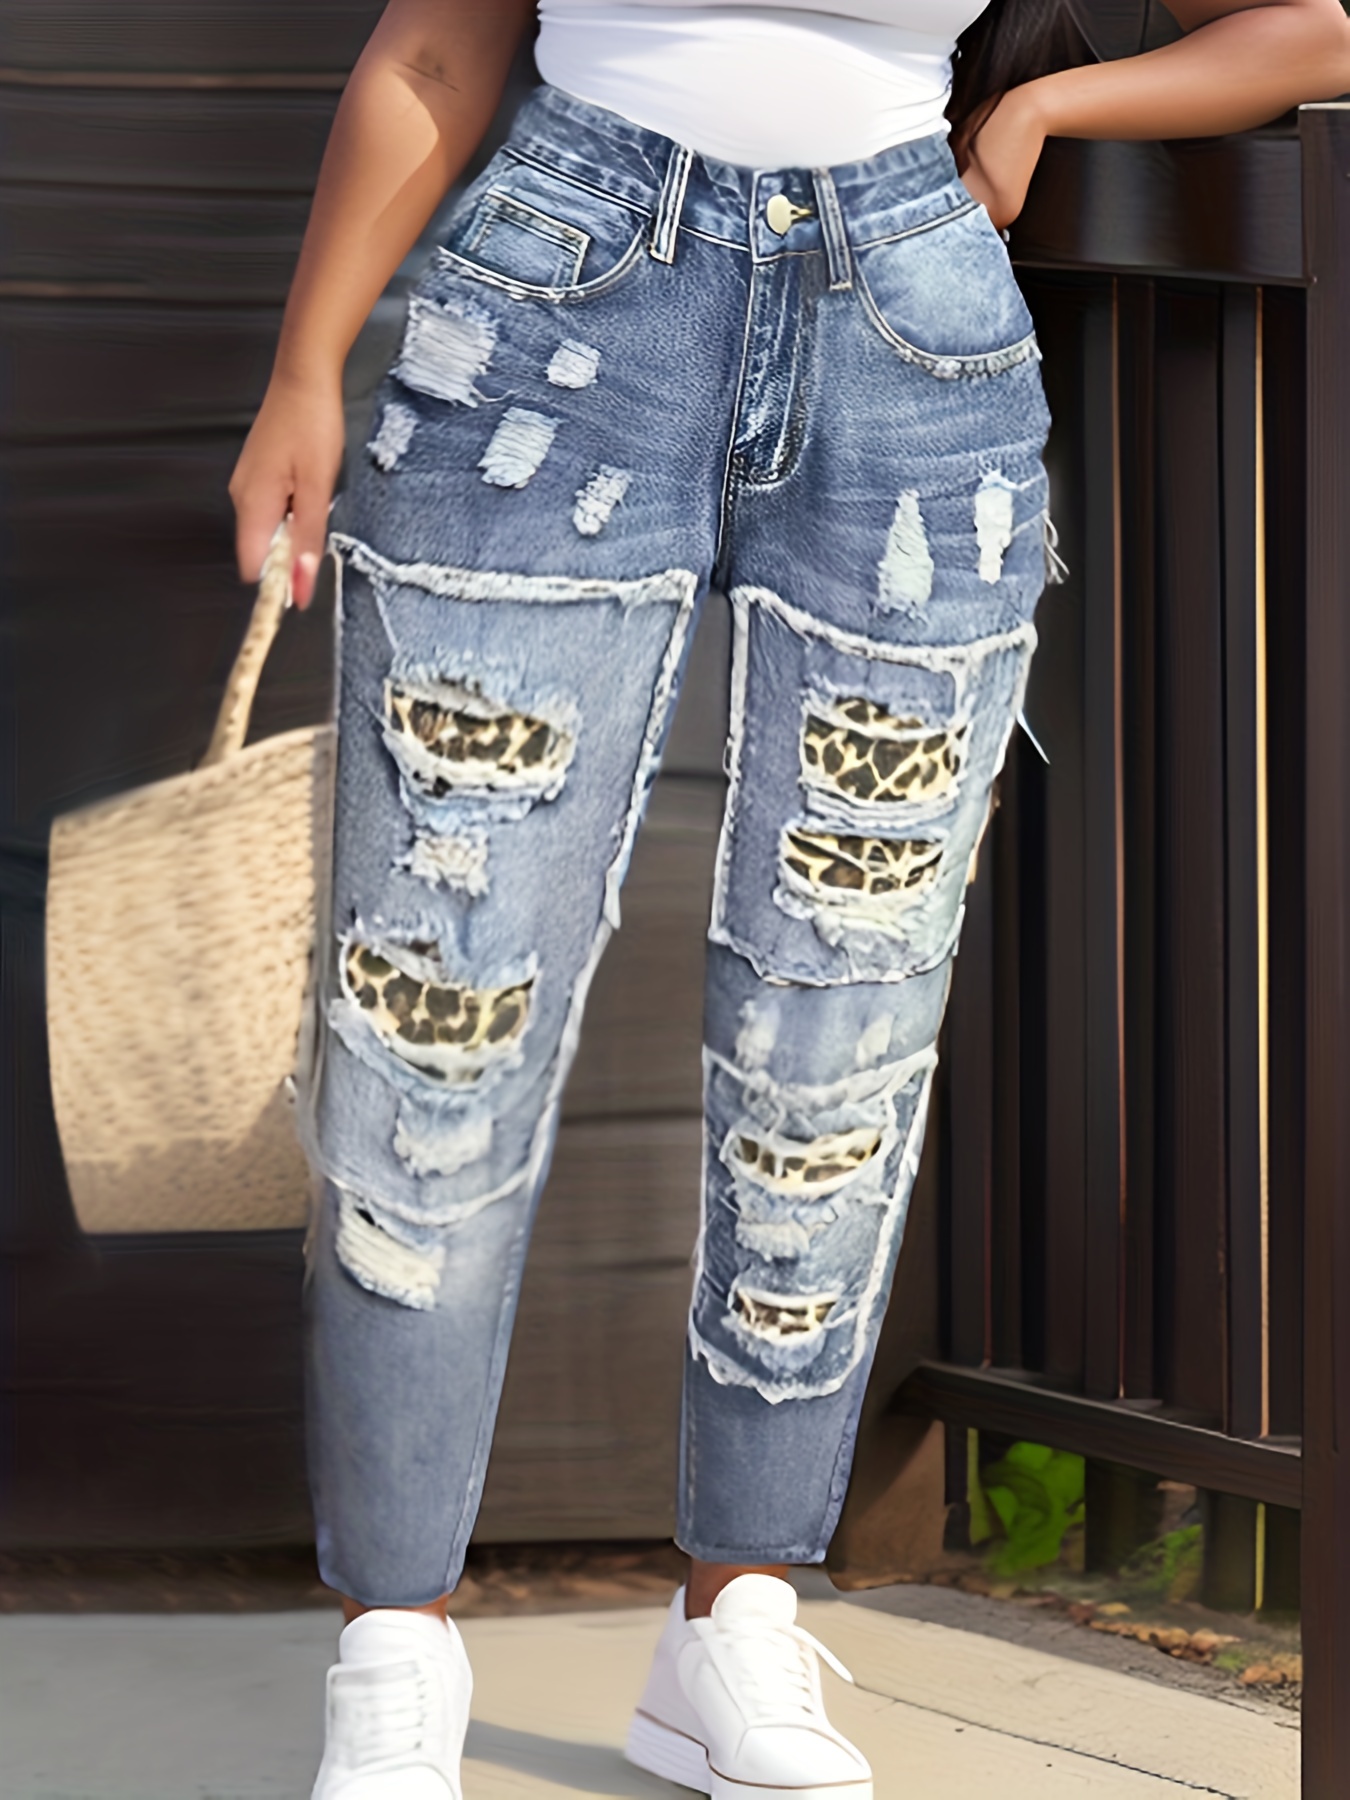 Leopard Print * Ripped Denim Pants, Distressed Frayed Seam Light Washed  Blue Causal Jeans, Women's Denim Jeans & Clothing